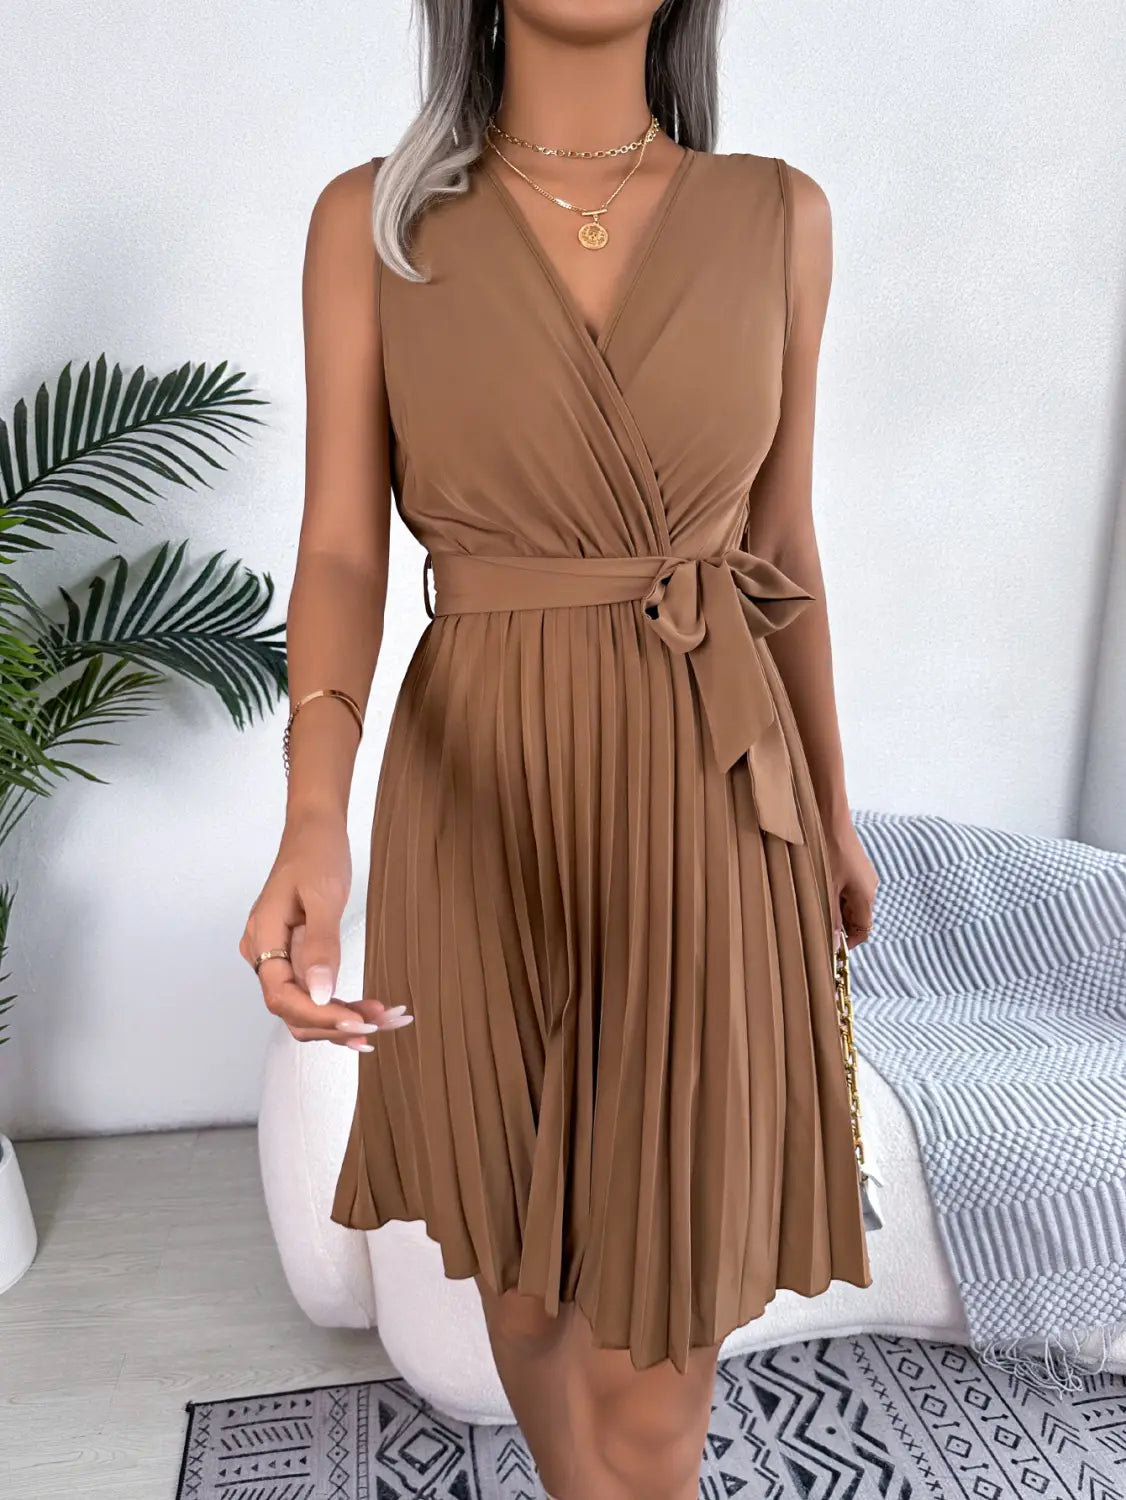 Elegant Chiffon Belted A-line Dress - Effortless Charm For Daily Chic